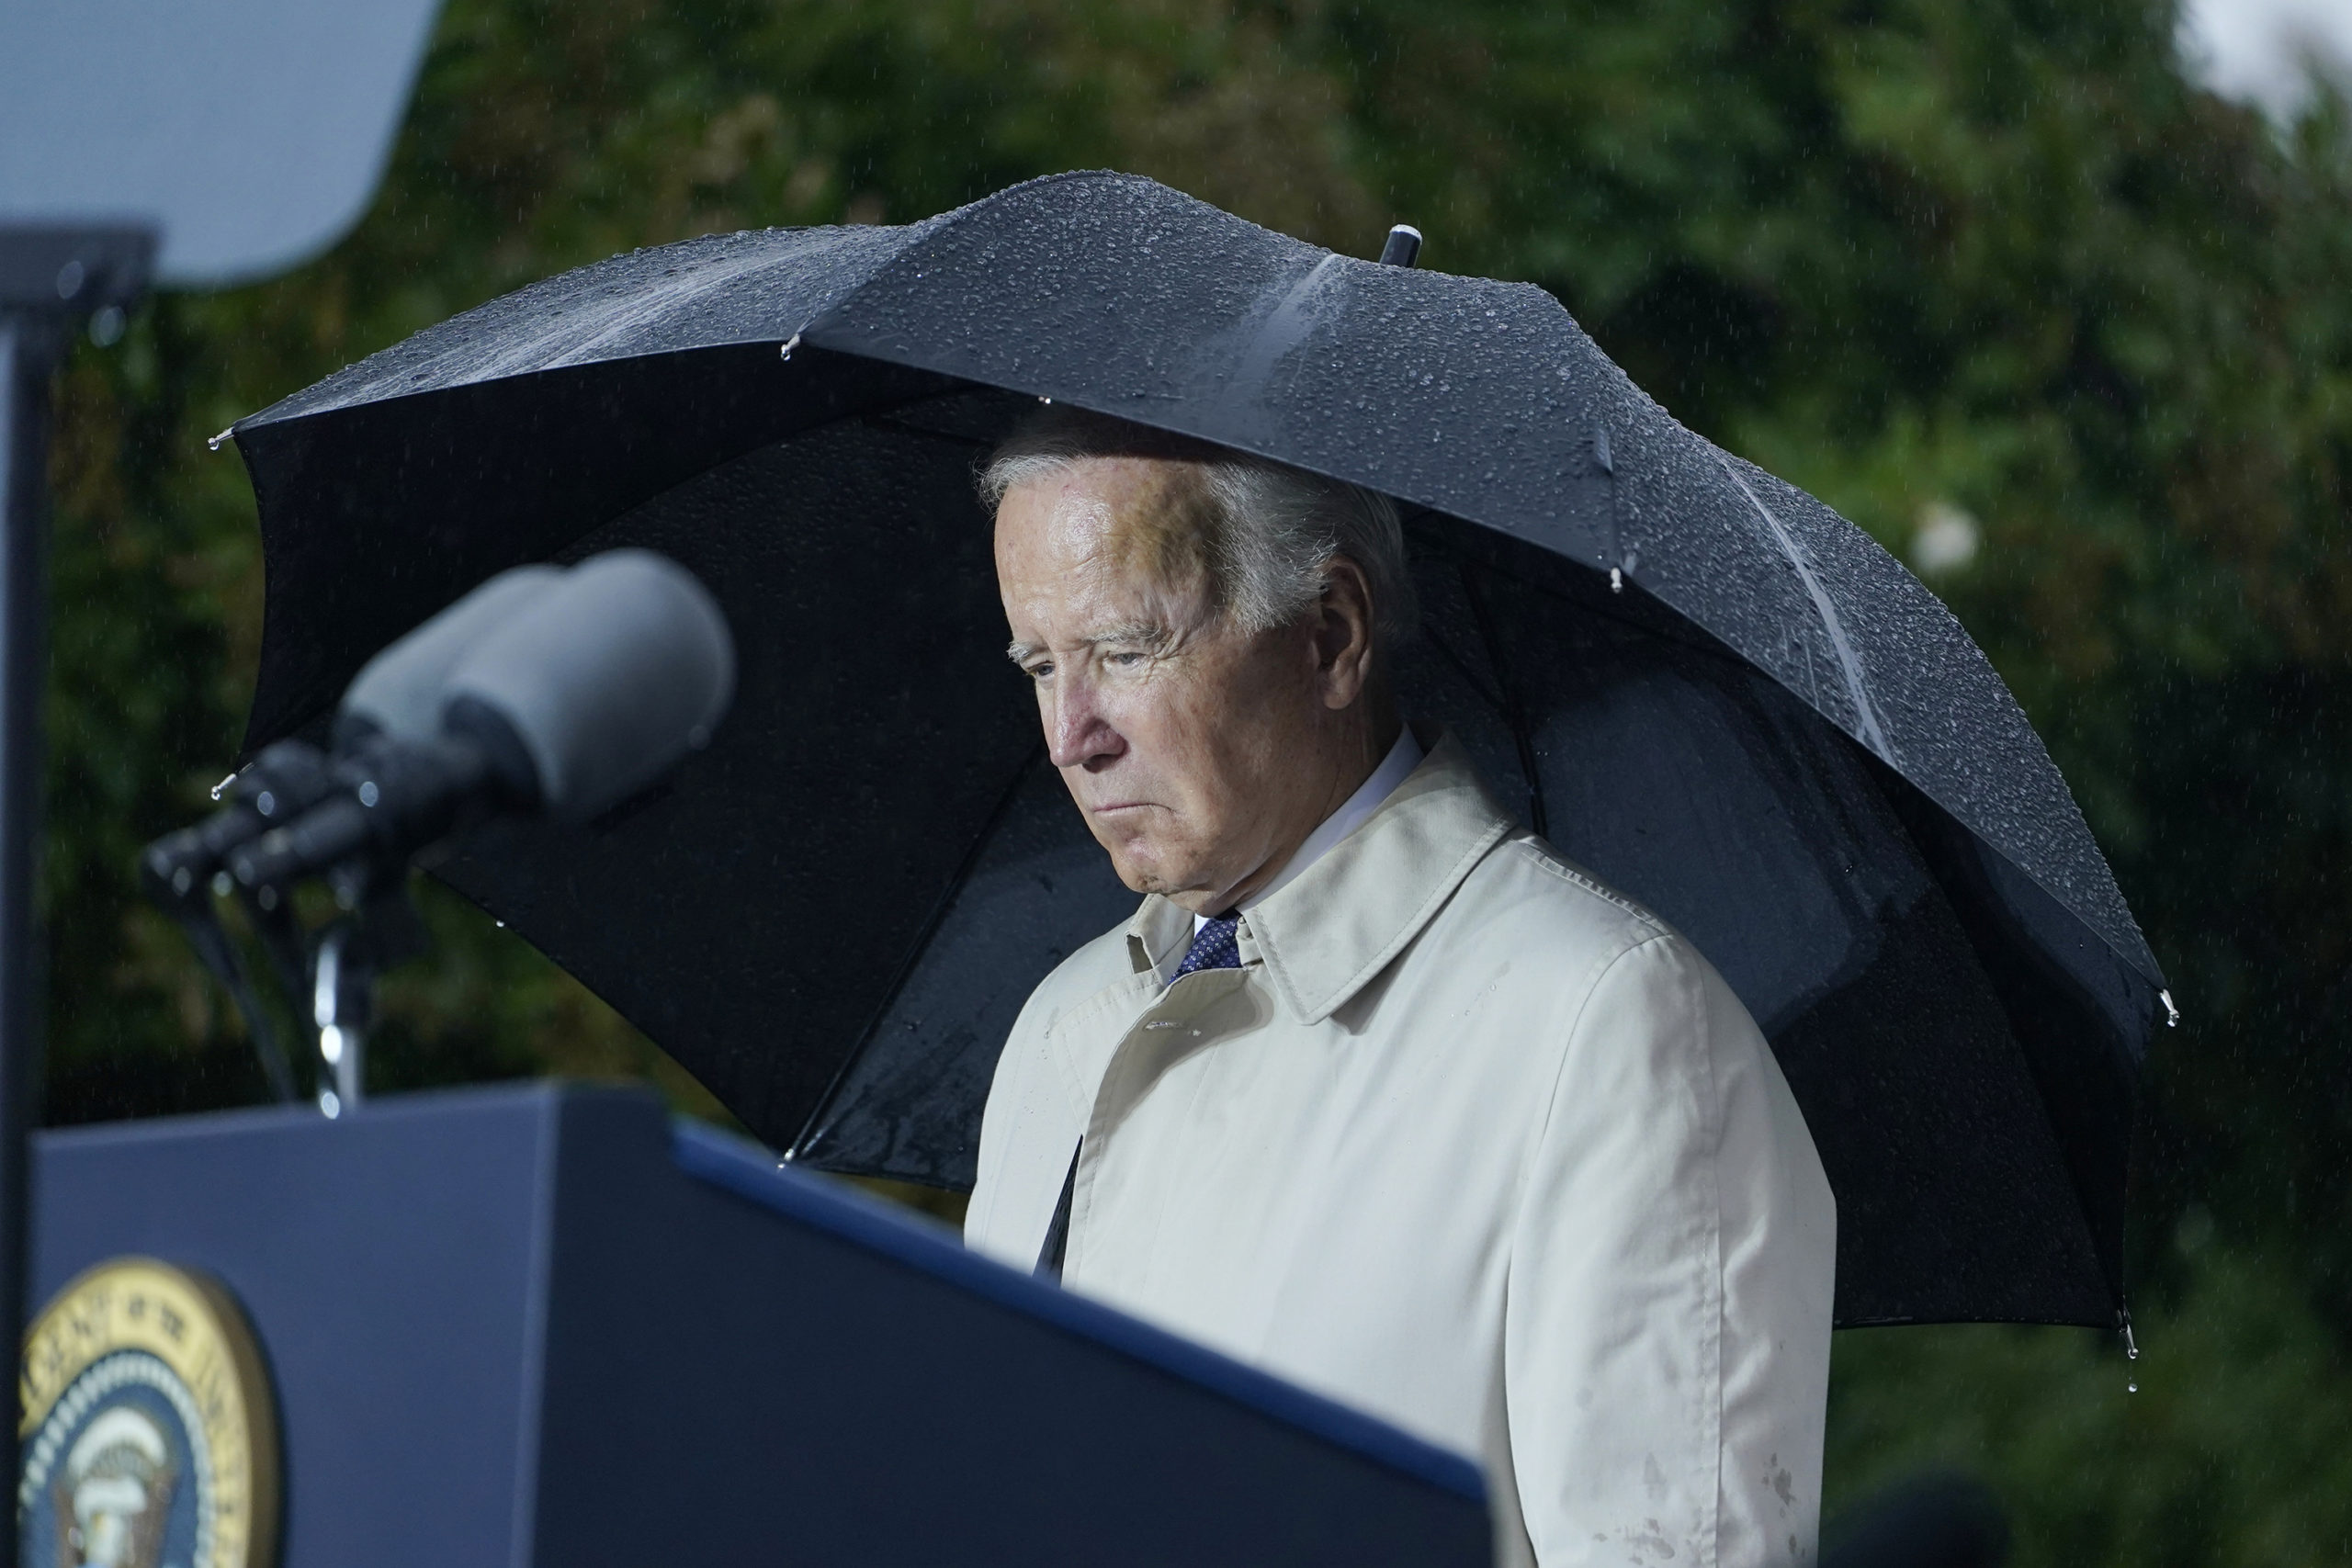 President Joe Biden stands during a moment of silence during a ceremony at the Pentagon in Washingt...